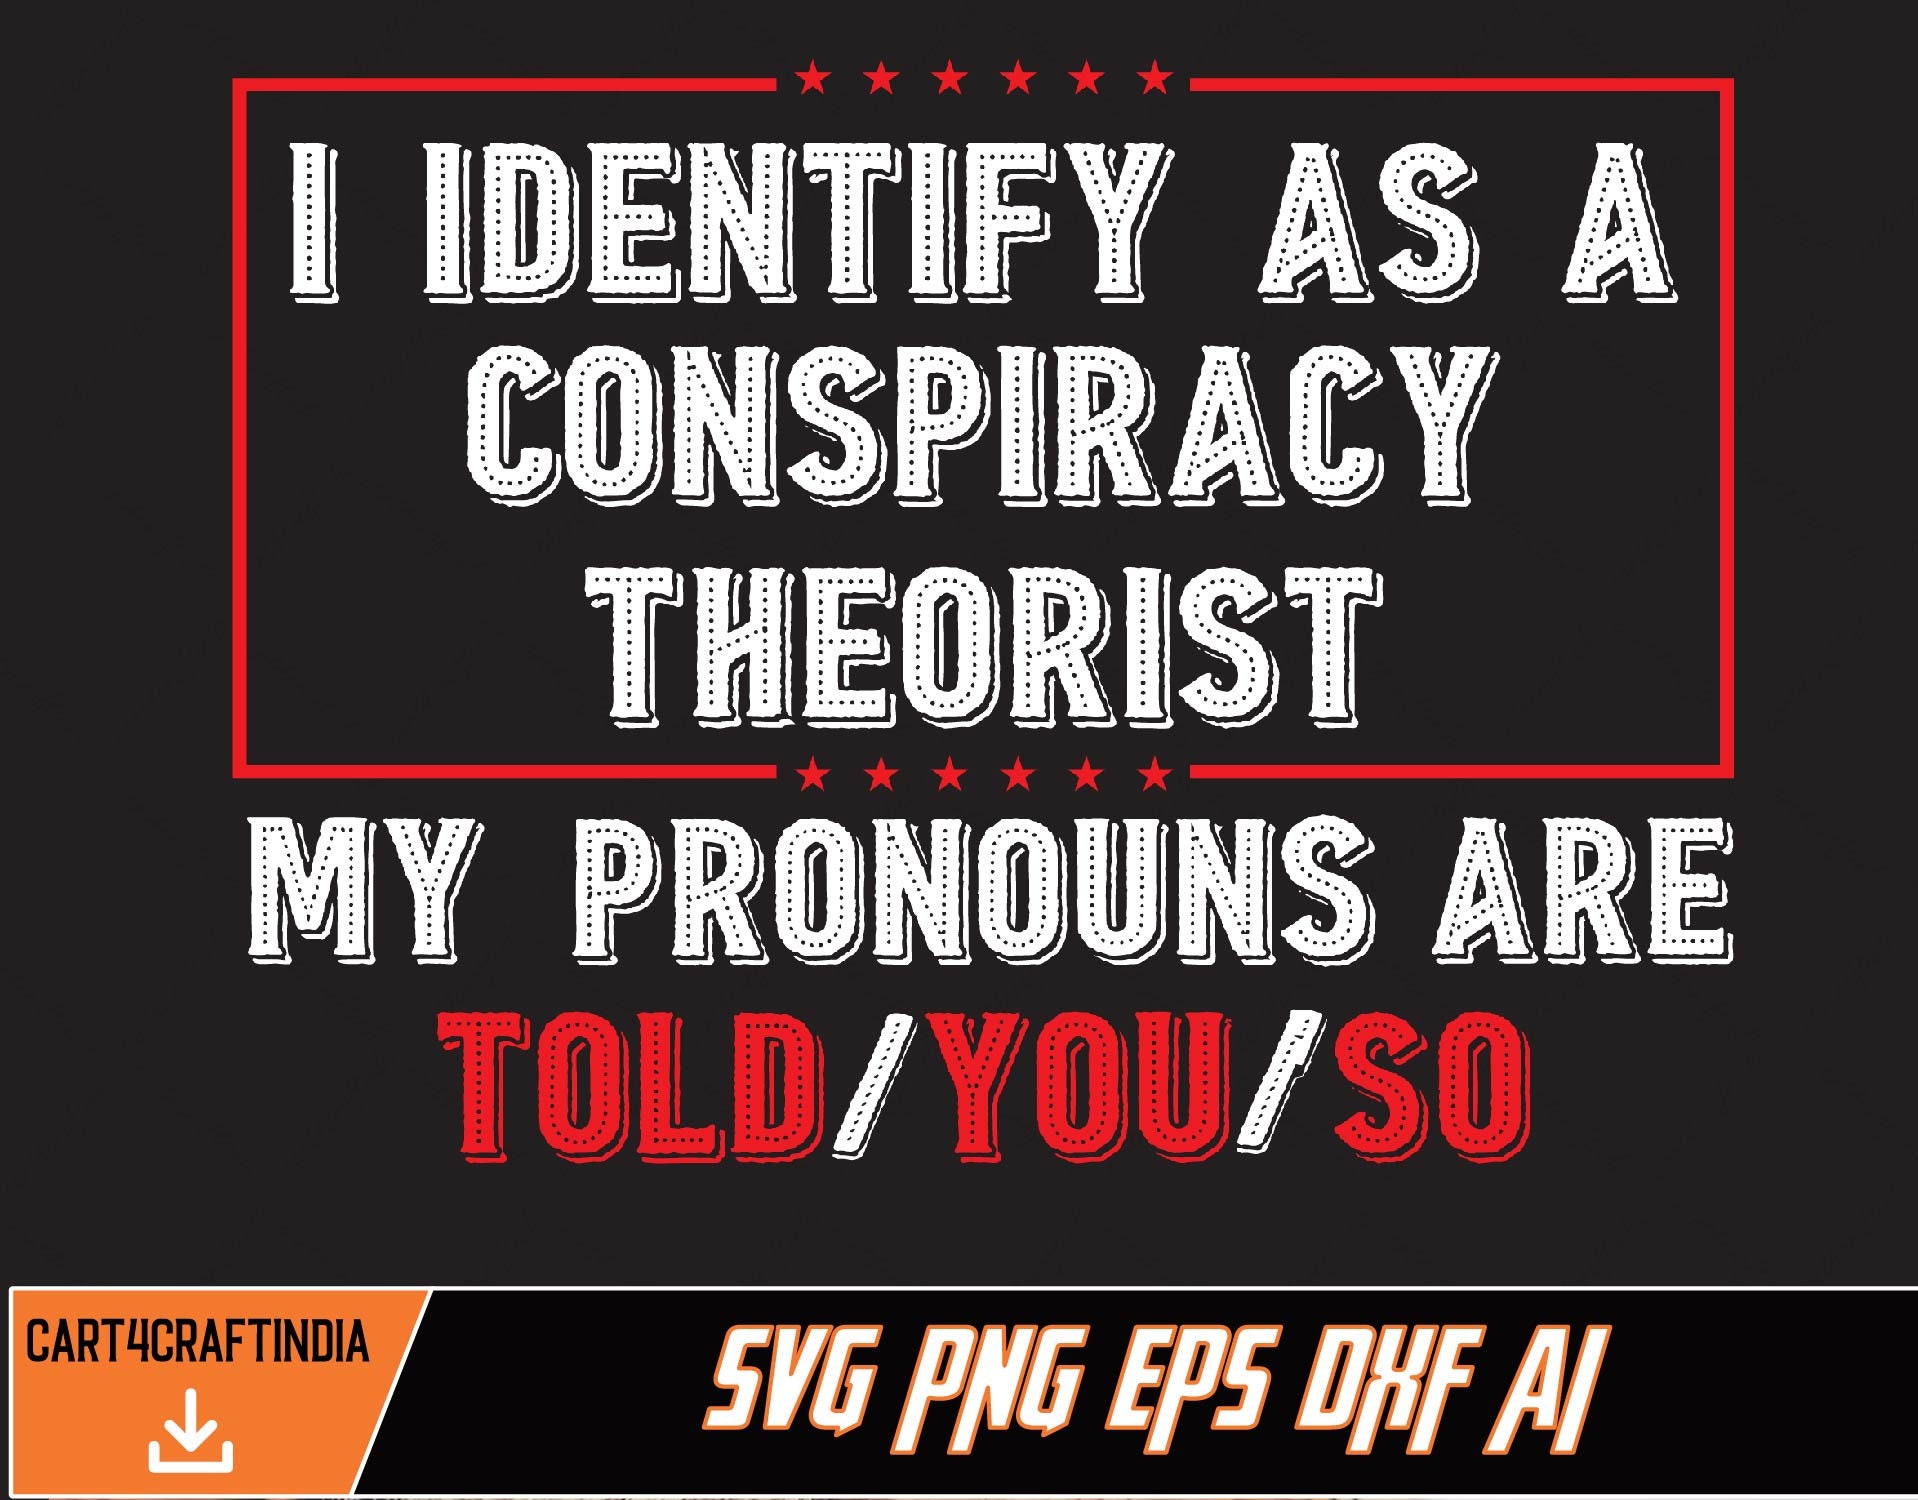 FREE shipping I identify as a conspiracy theorist my pronouns are